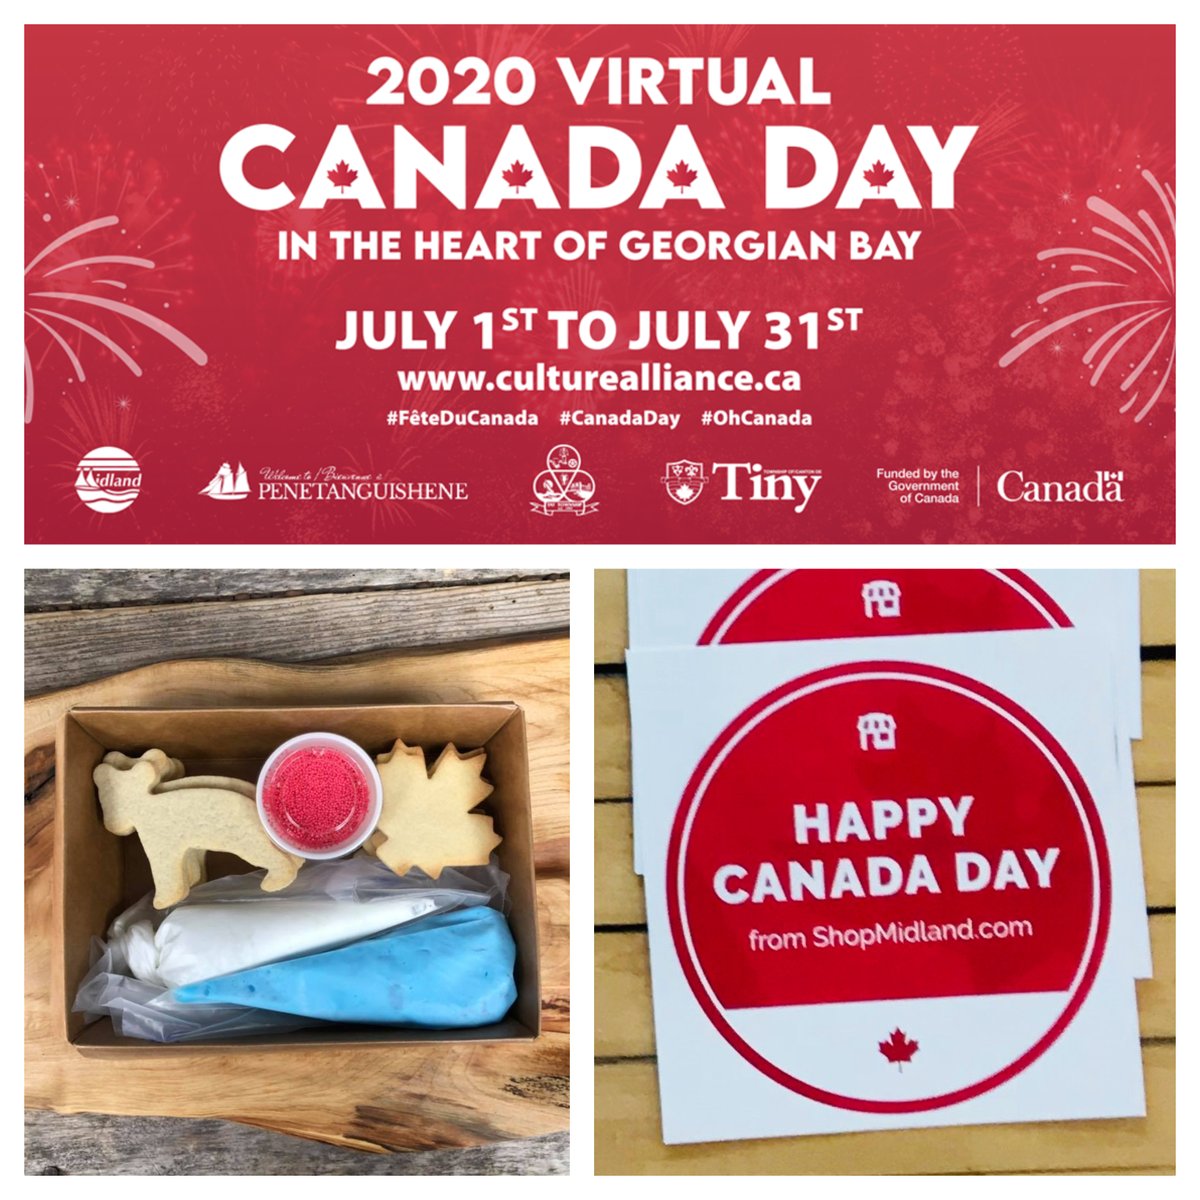 Visit our Downtown Midland booth tomorrow (Sunday, June 28th) at the Southern Georgian Bay Farmers Markets from 9am to 1pm to receive a Free Canada Day Cookie Decorating Kit. ShopMidland.com will be handing out free stickers. Virtual Canada Day: culturealliance.ca/canada-day-202…